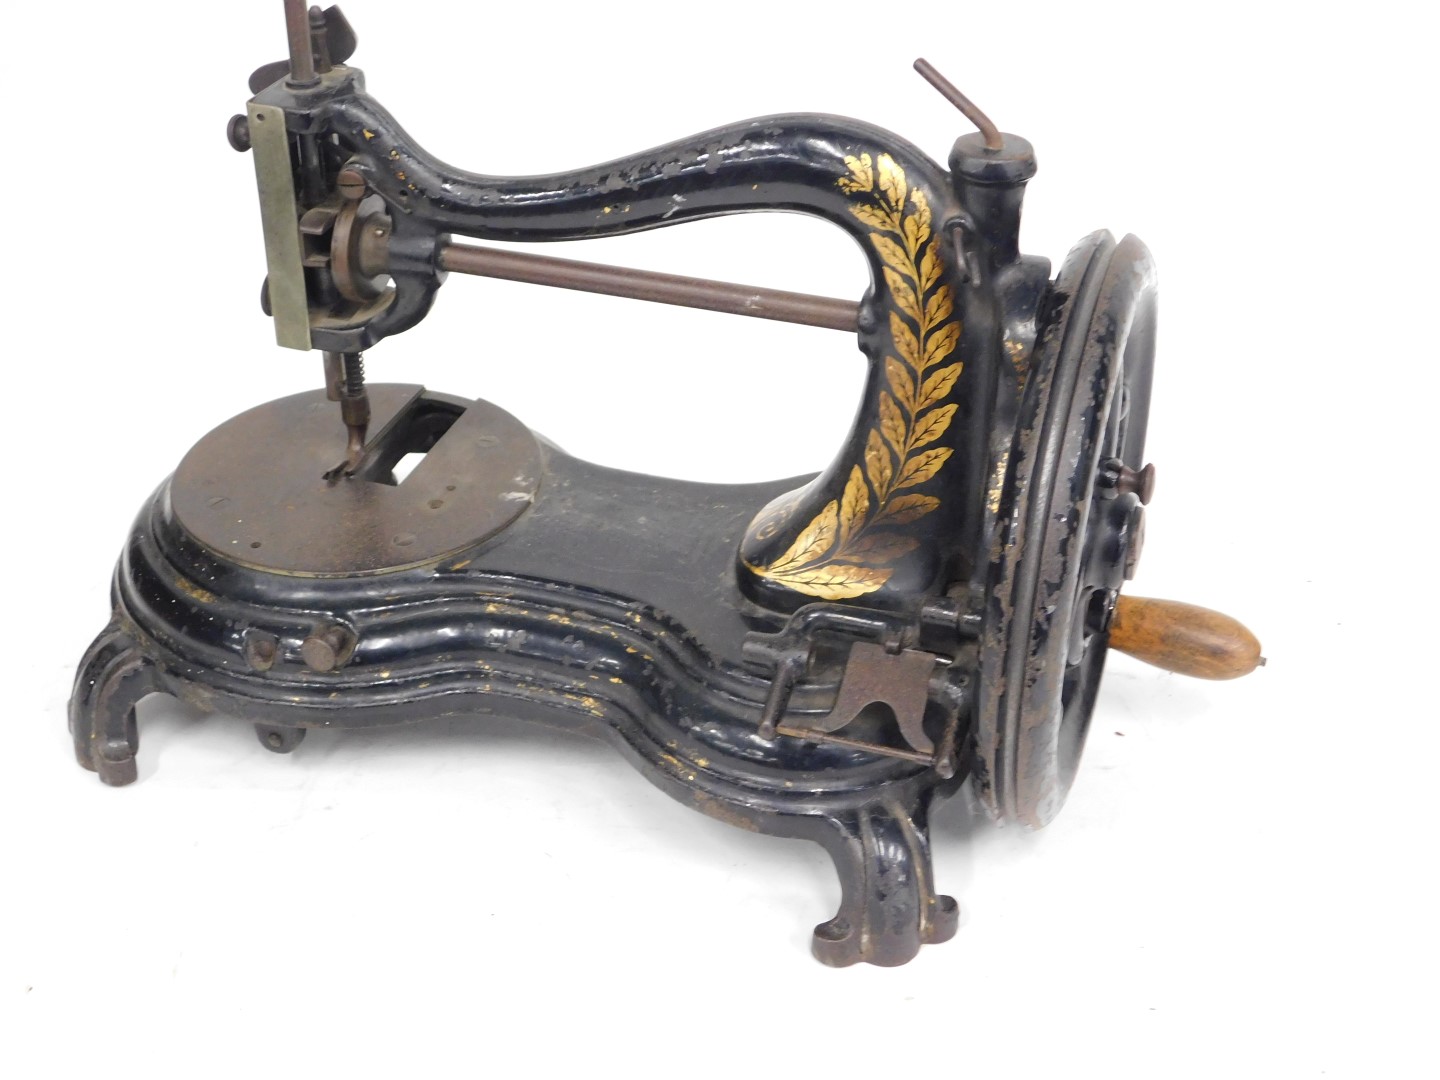 A 19thC sewing machine, on black cast base, with gilt leaf decoration and spun handle, on splayed le - Image 3 of 4